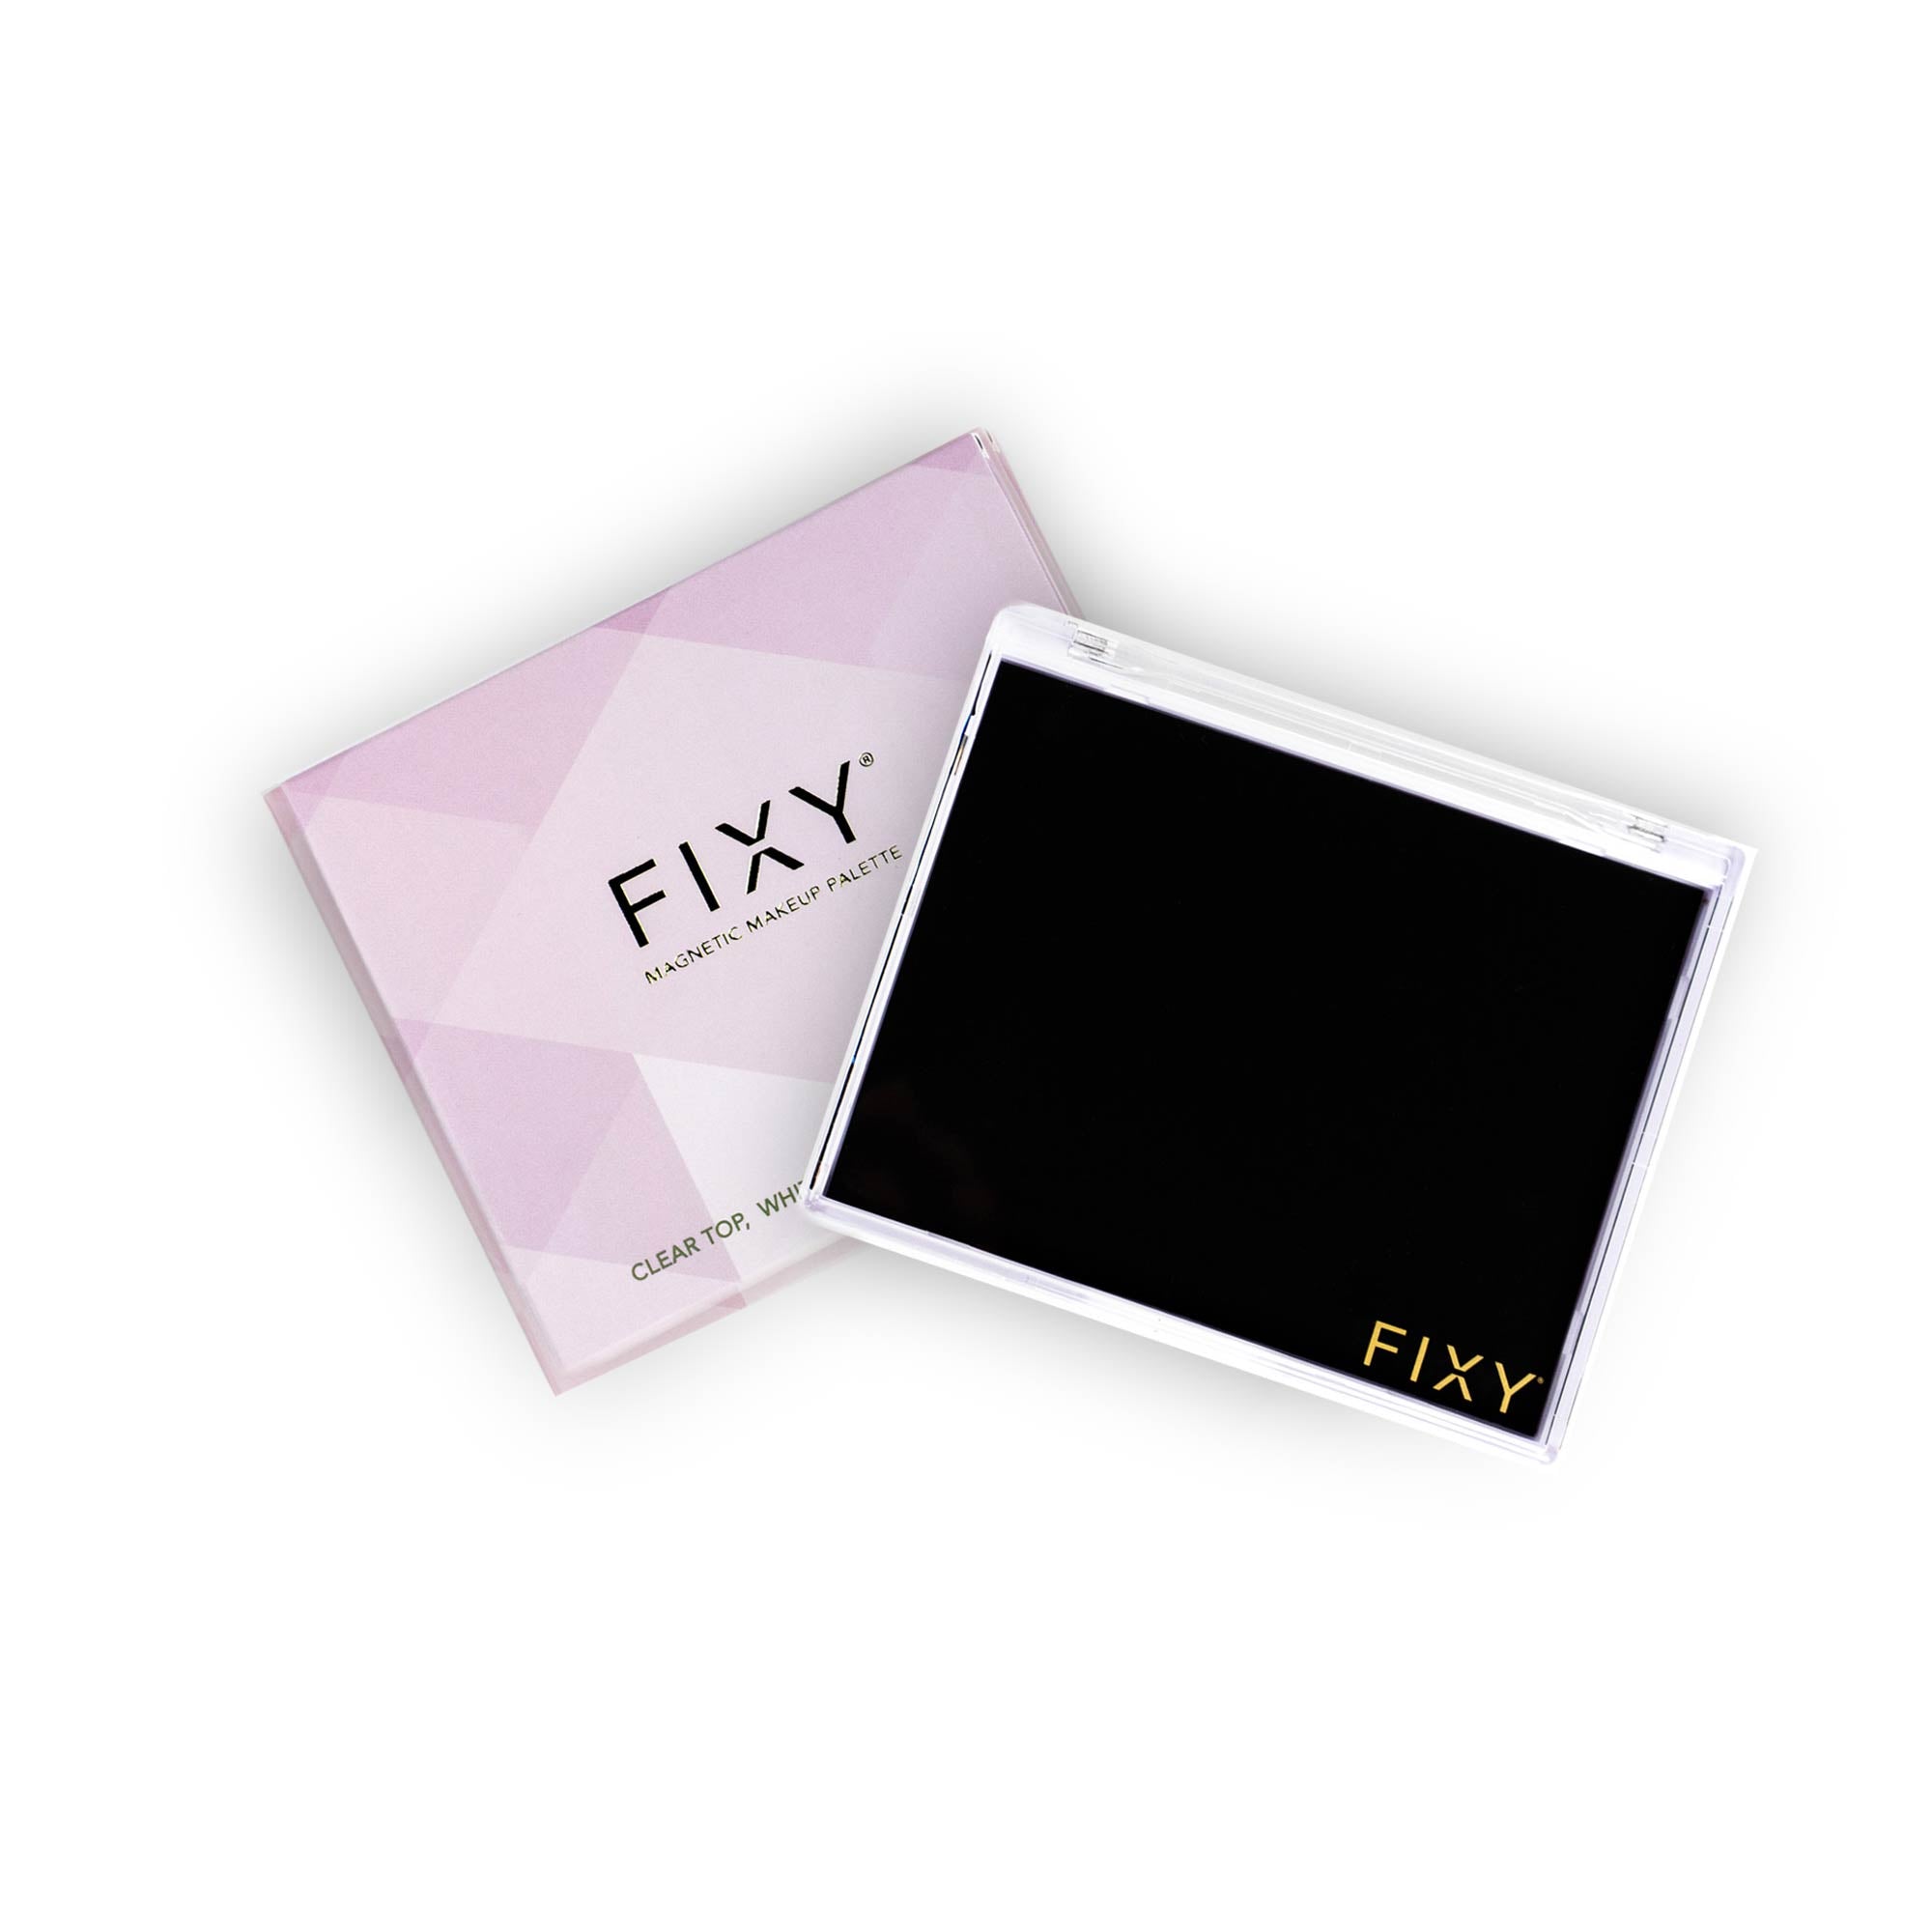 FIXY Small 4&quot;x4.8&quot; Magnetic Makeup Palette, crafted from post-consumer recycled plastic, presented next to its geometric patterned box featuring a clear top, white base, and an extra-strong magnet, demonstrating the brand&#39;s eco-friendly packaging and product design.